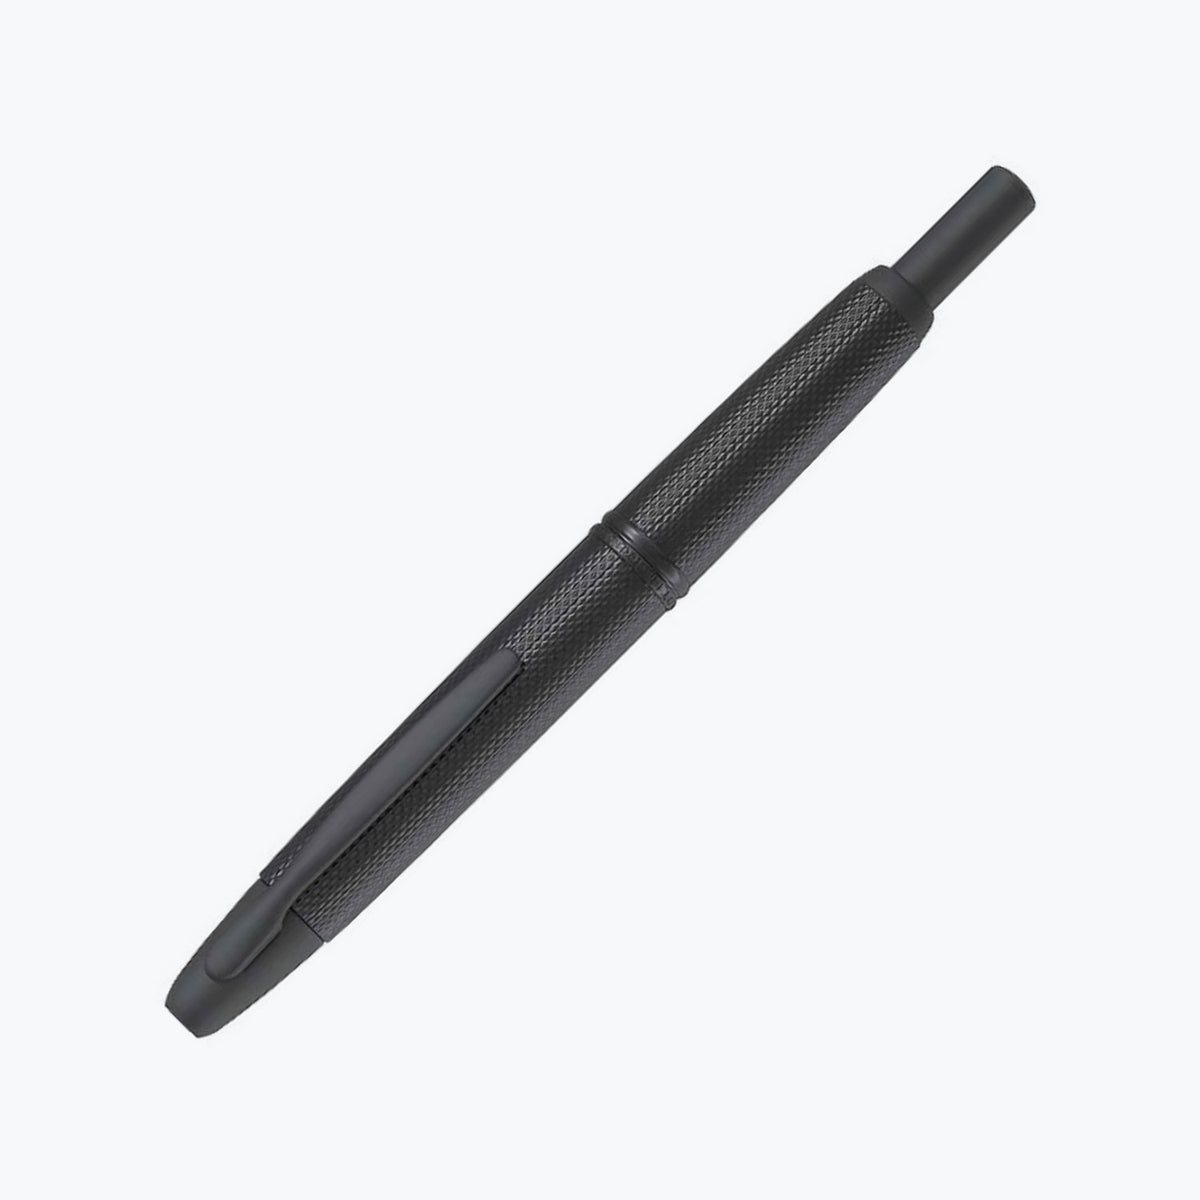 Pilot - Fountain Pen - Capless - Black Link (2020 Limited Edition) [SOLD OUT]